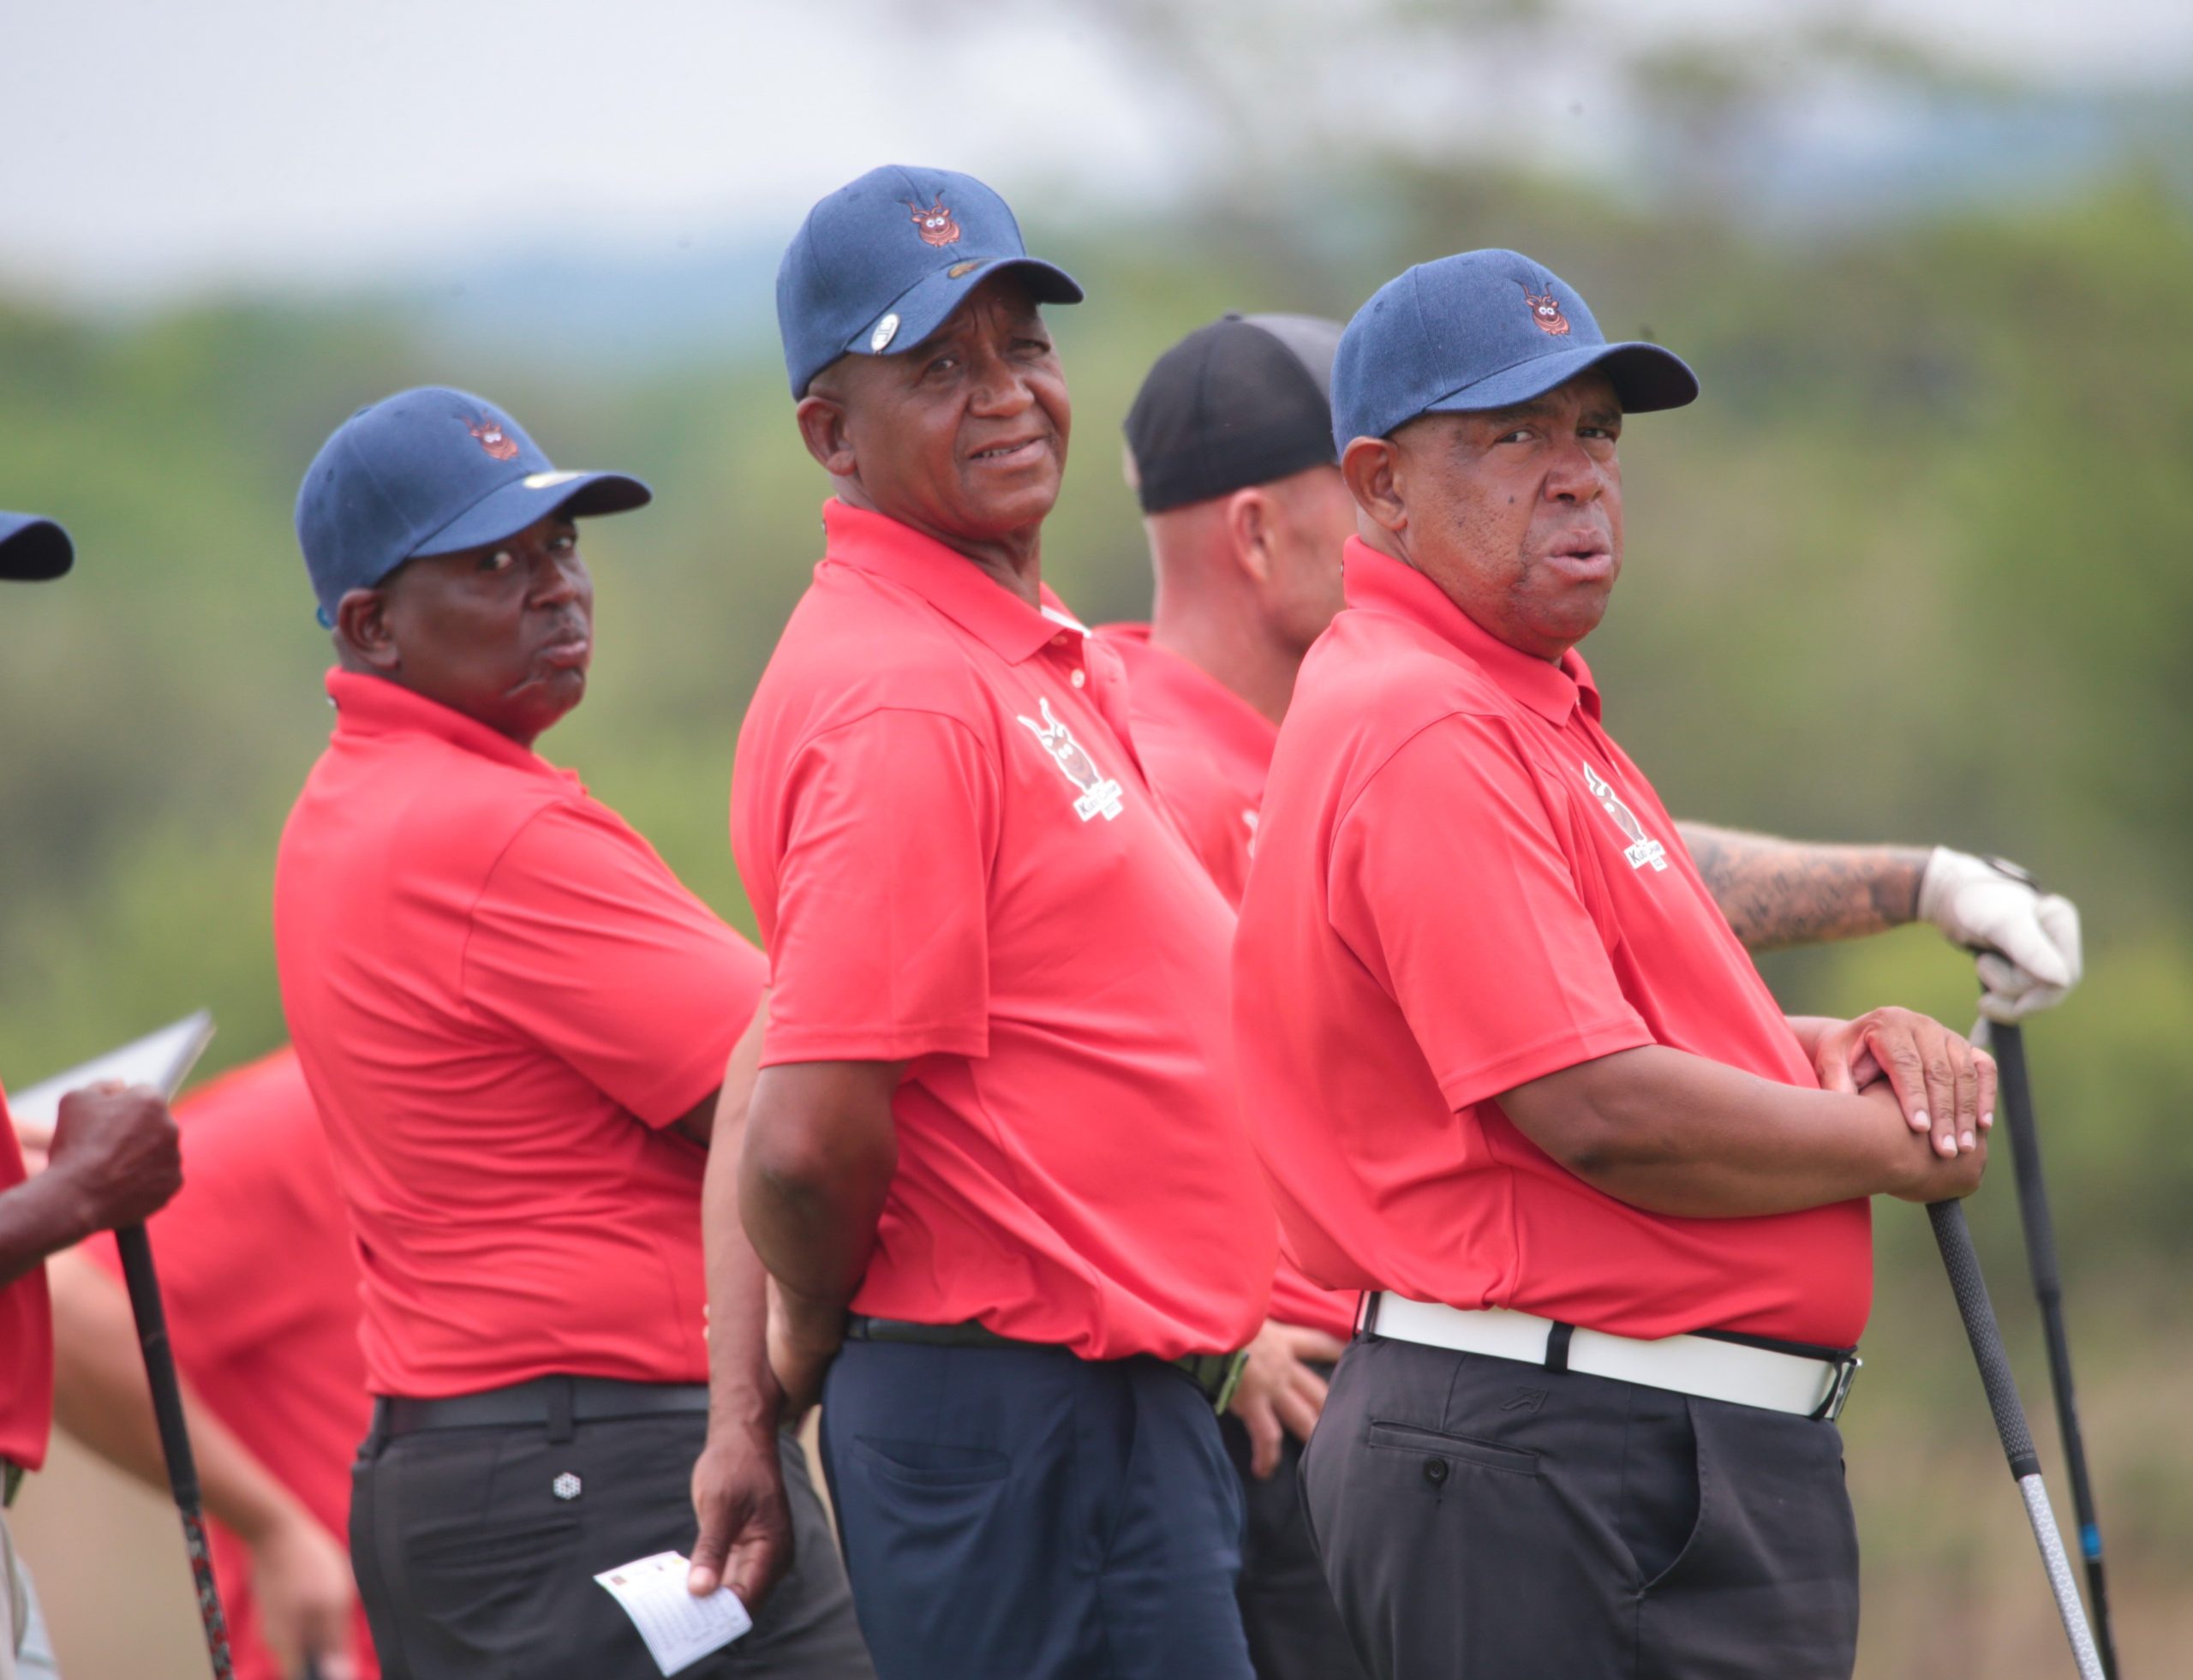 Kudu Amateur Golf Championship described as fulfilling experience